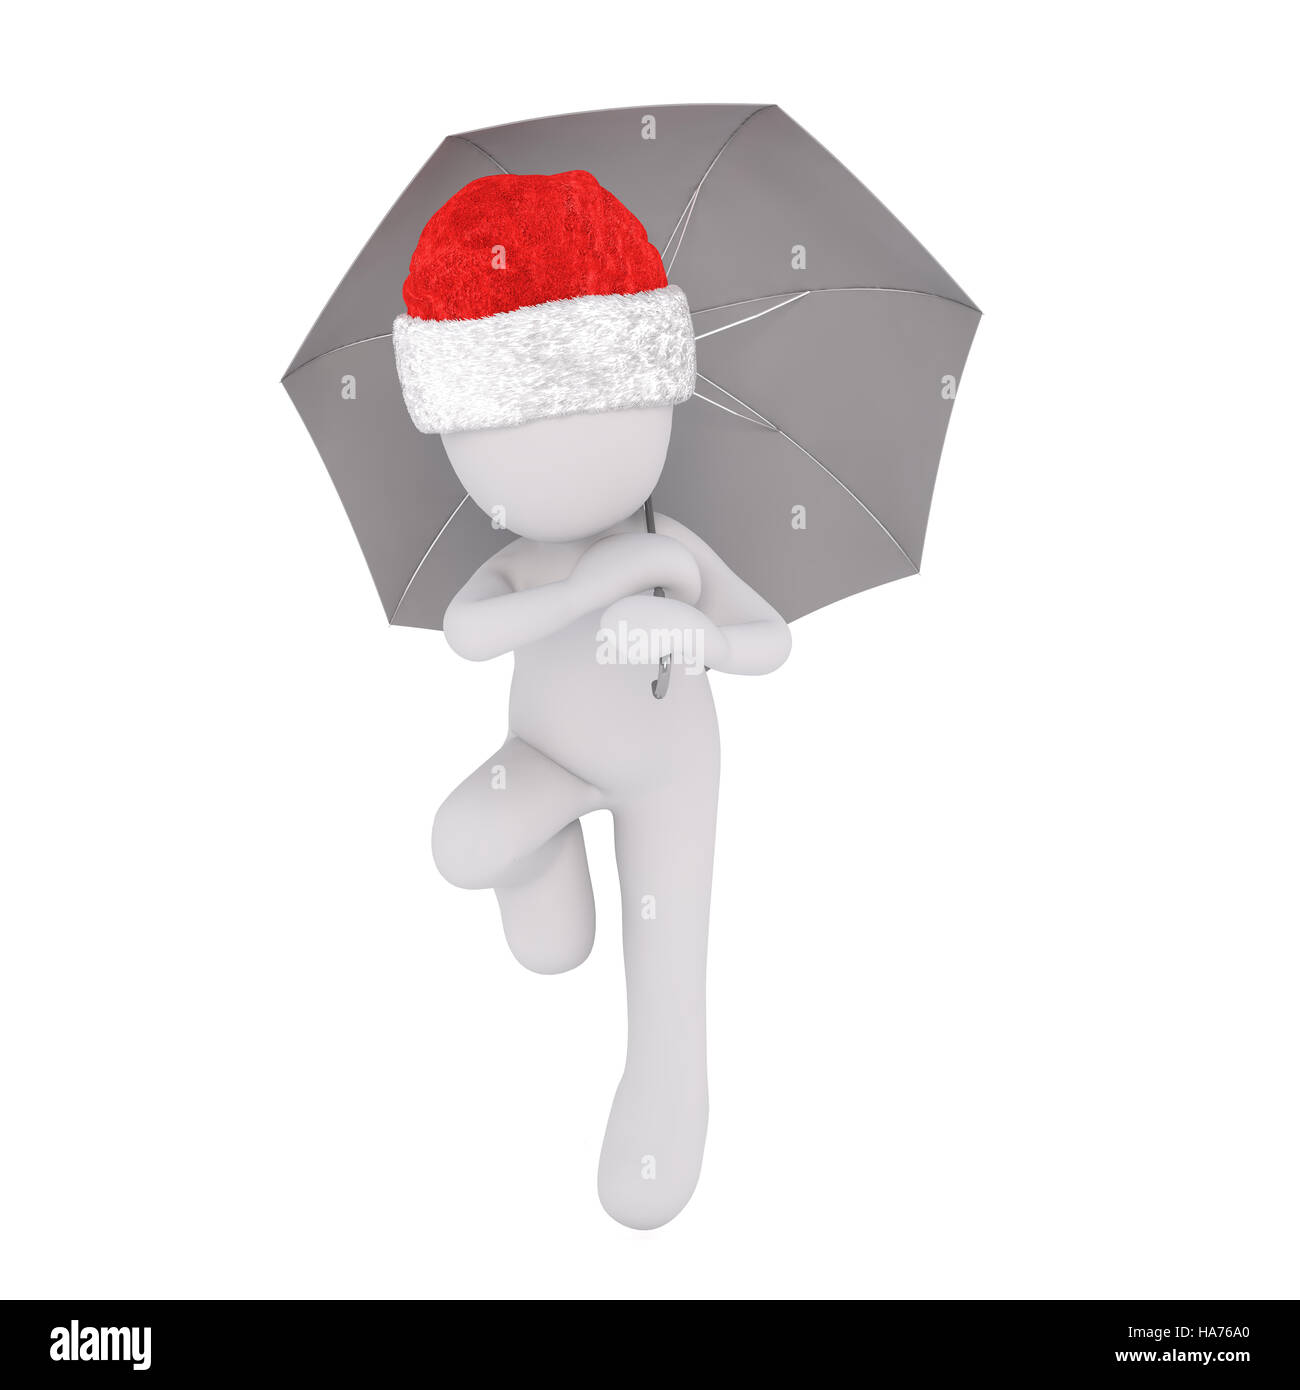 3d man walking towards the viewer holding an umbrella or sunshade over his head and wearing a red Christmas hat, isolated rendered illustration Stock Photo